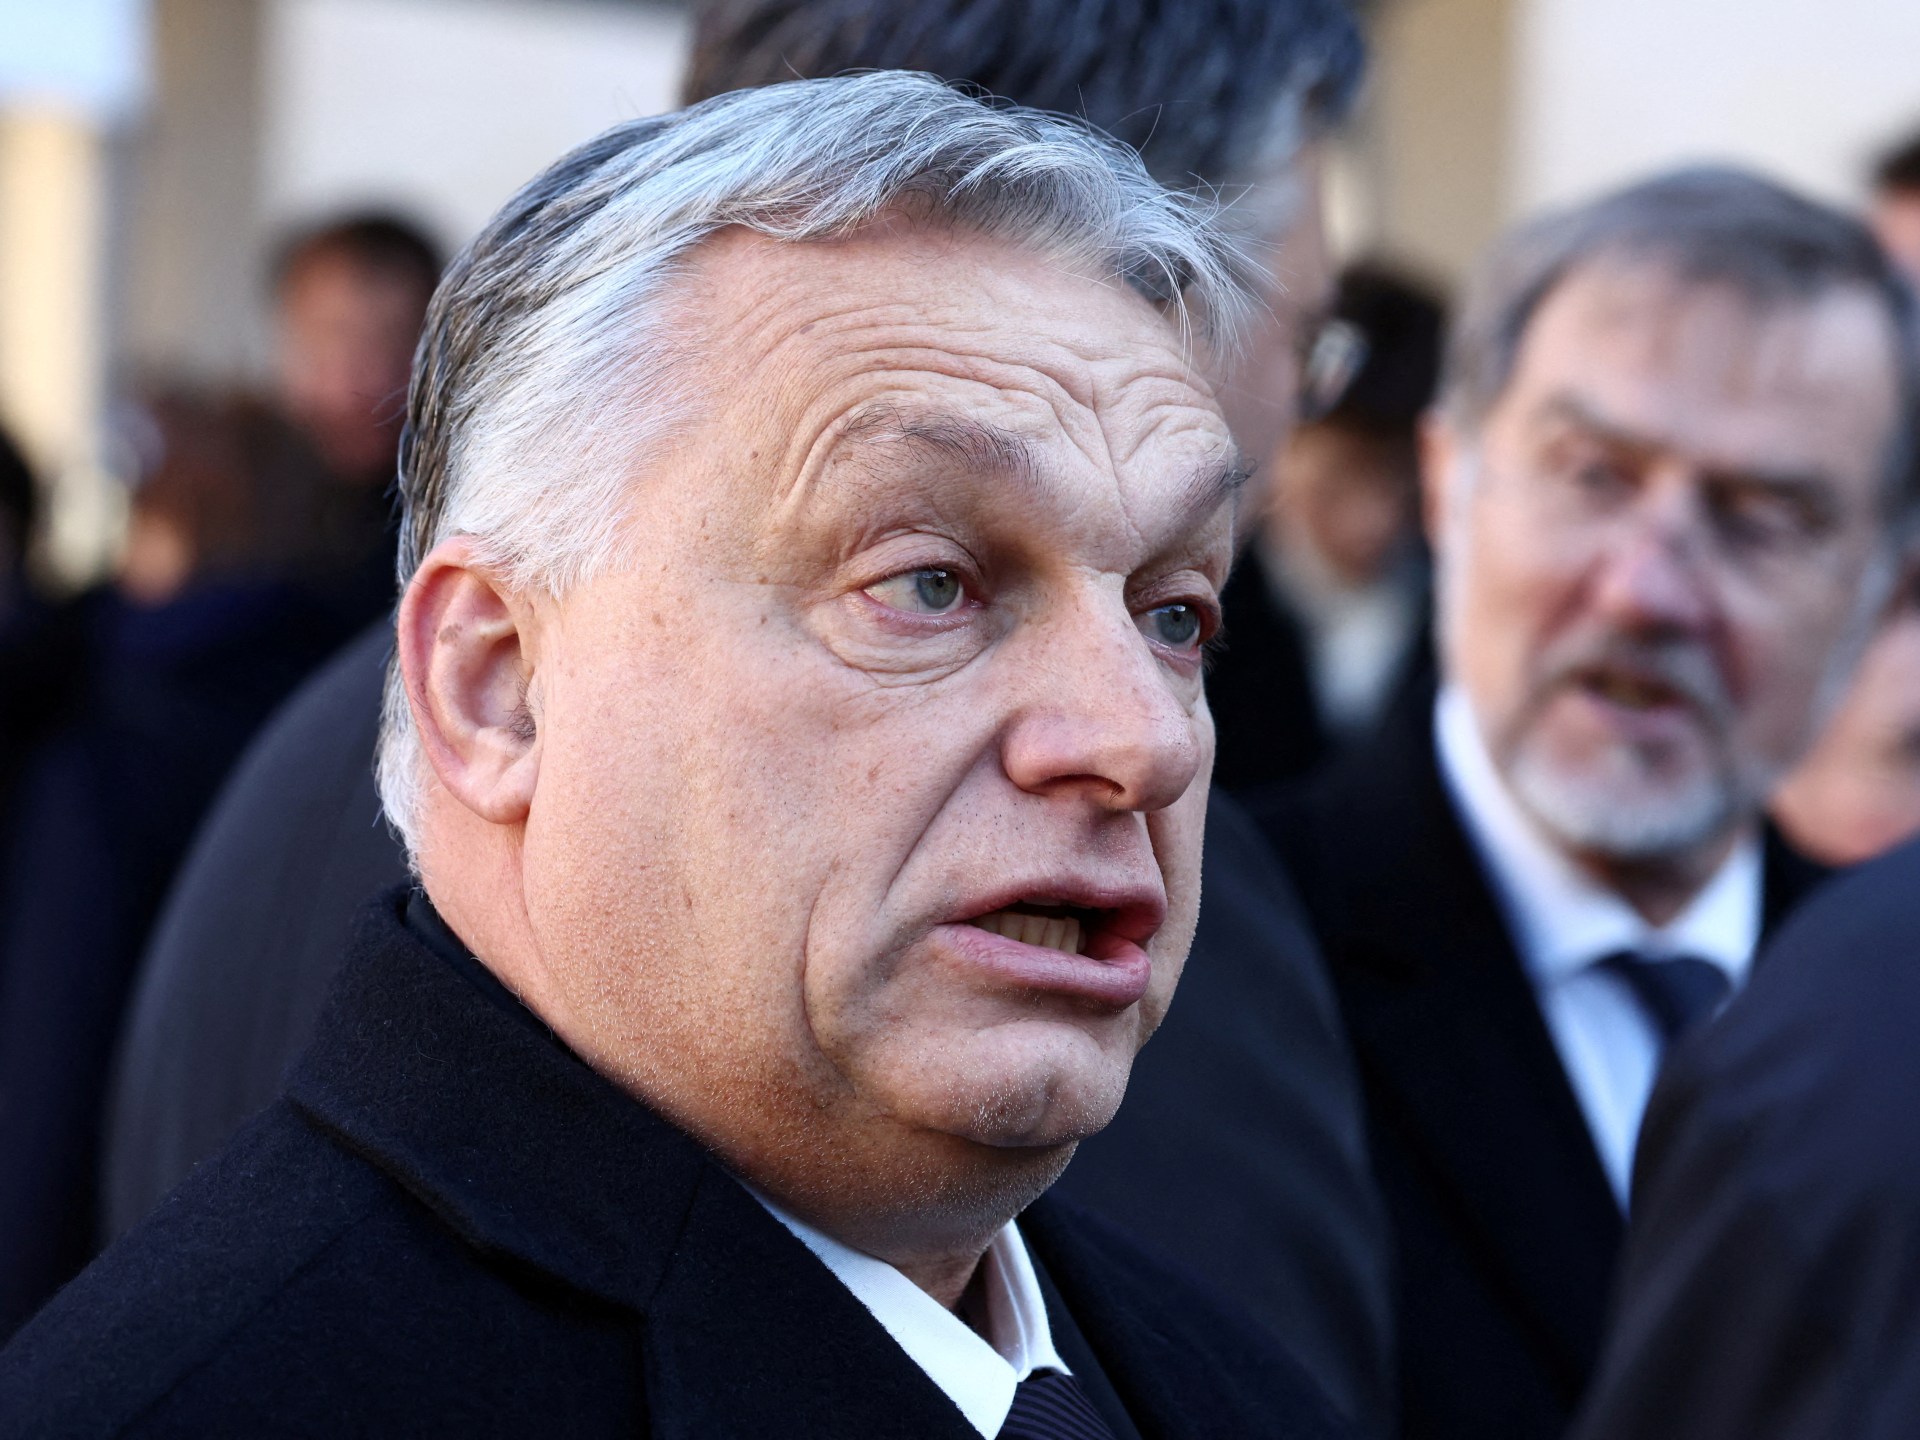 EU lawmakers push on with move to try and limit Hungary’s voting rights | European Union News